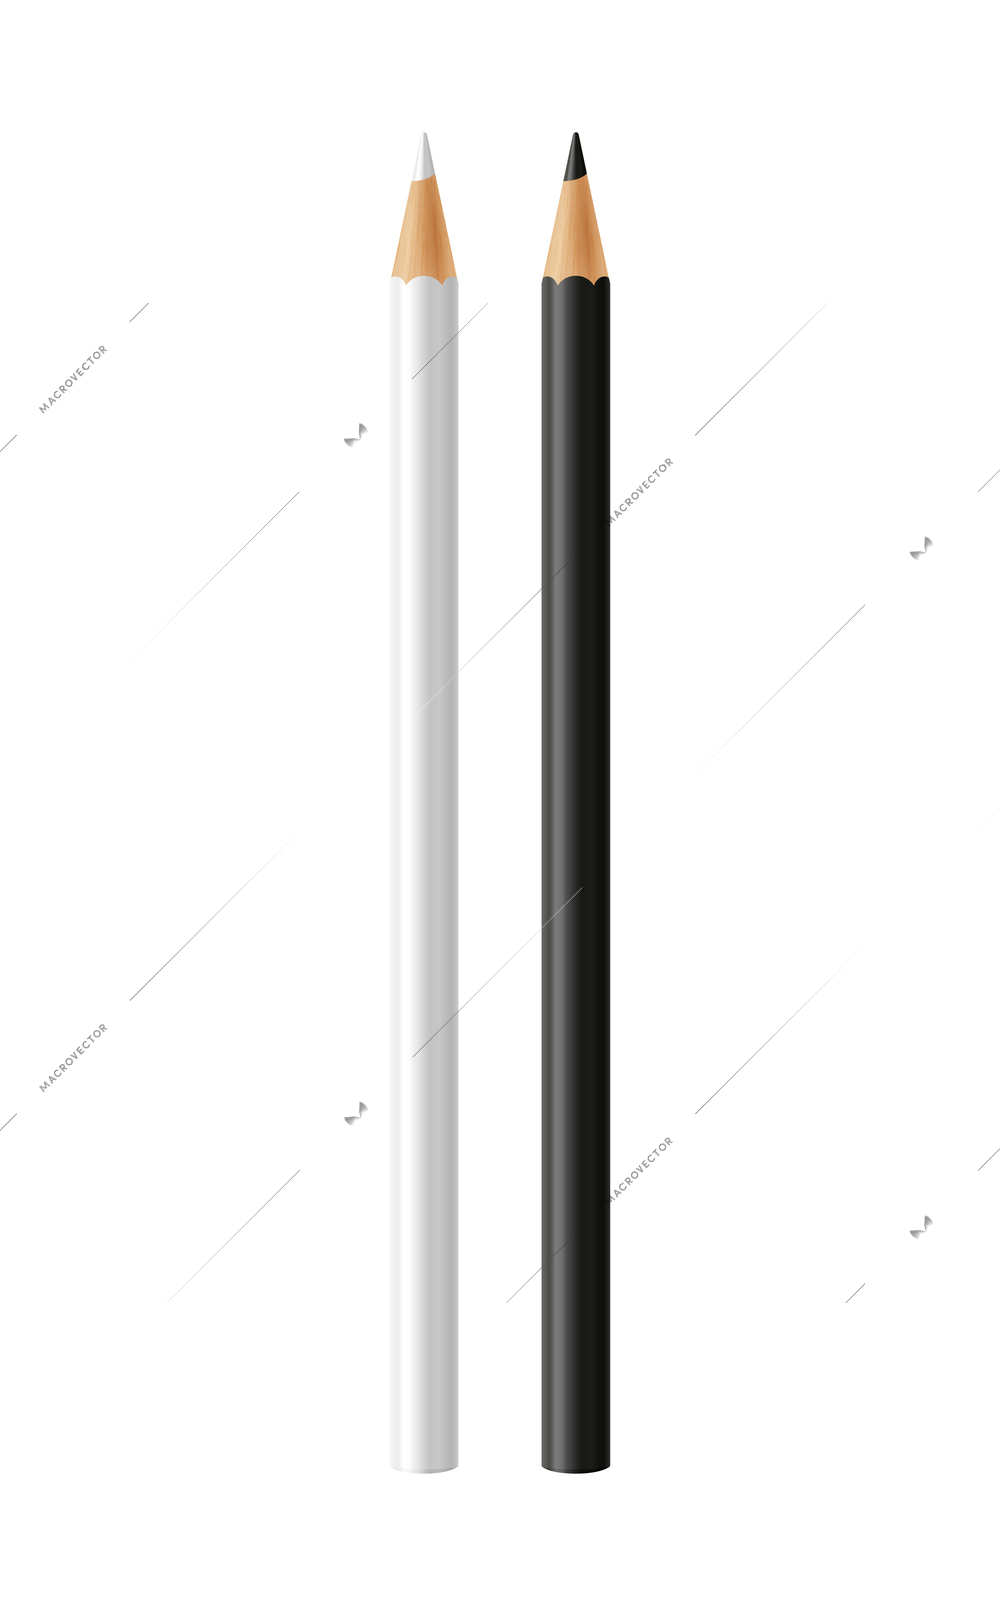 White and black pencils realistic isolated vector illustration